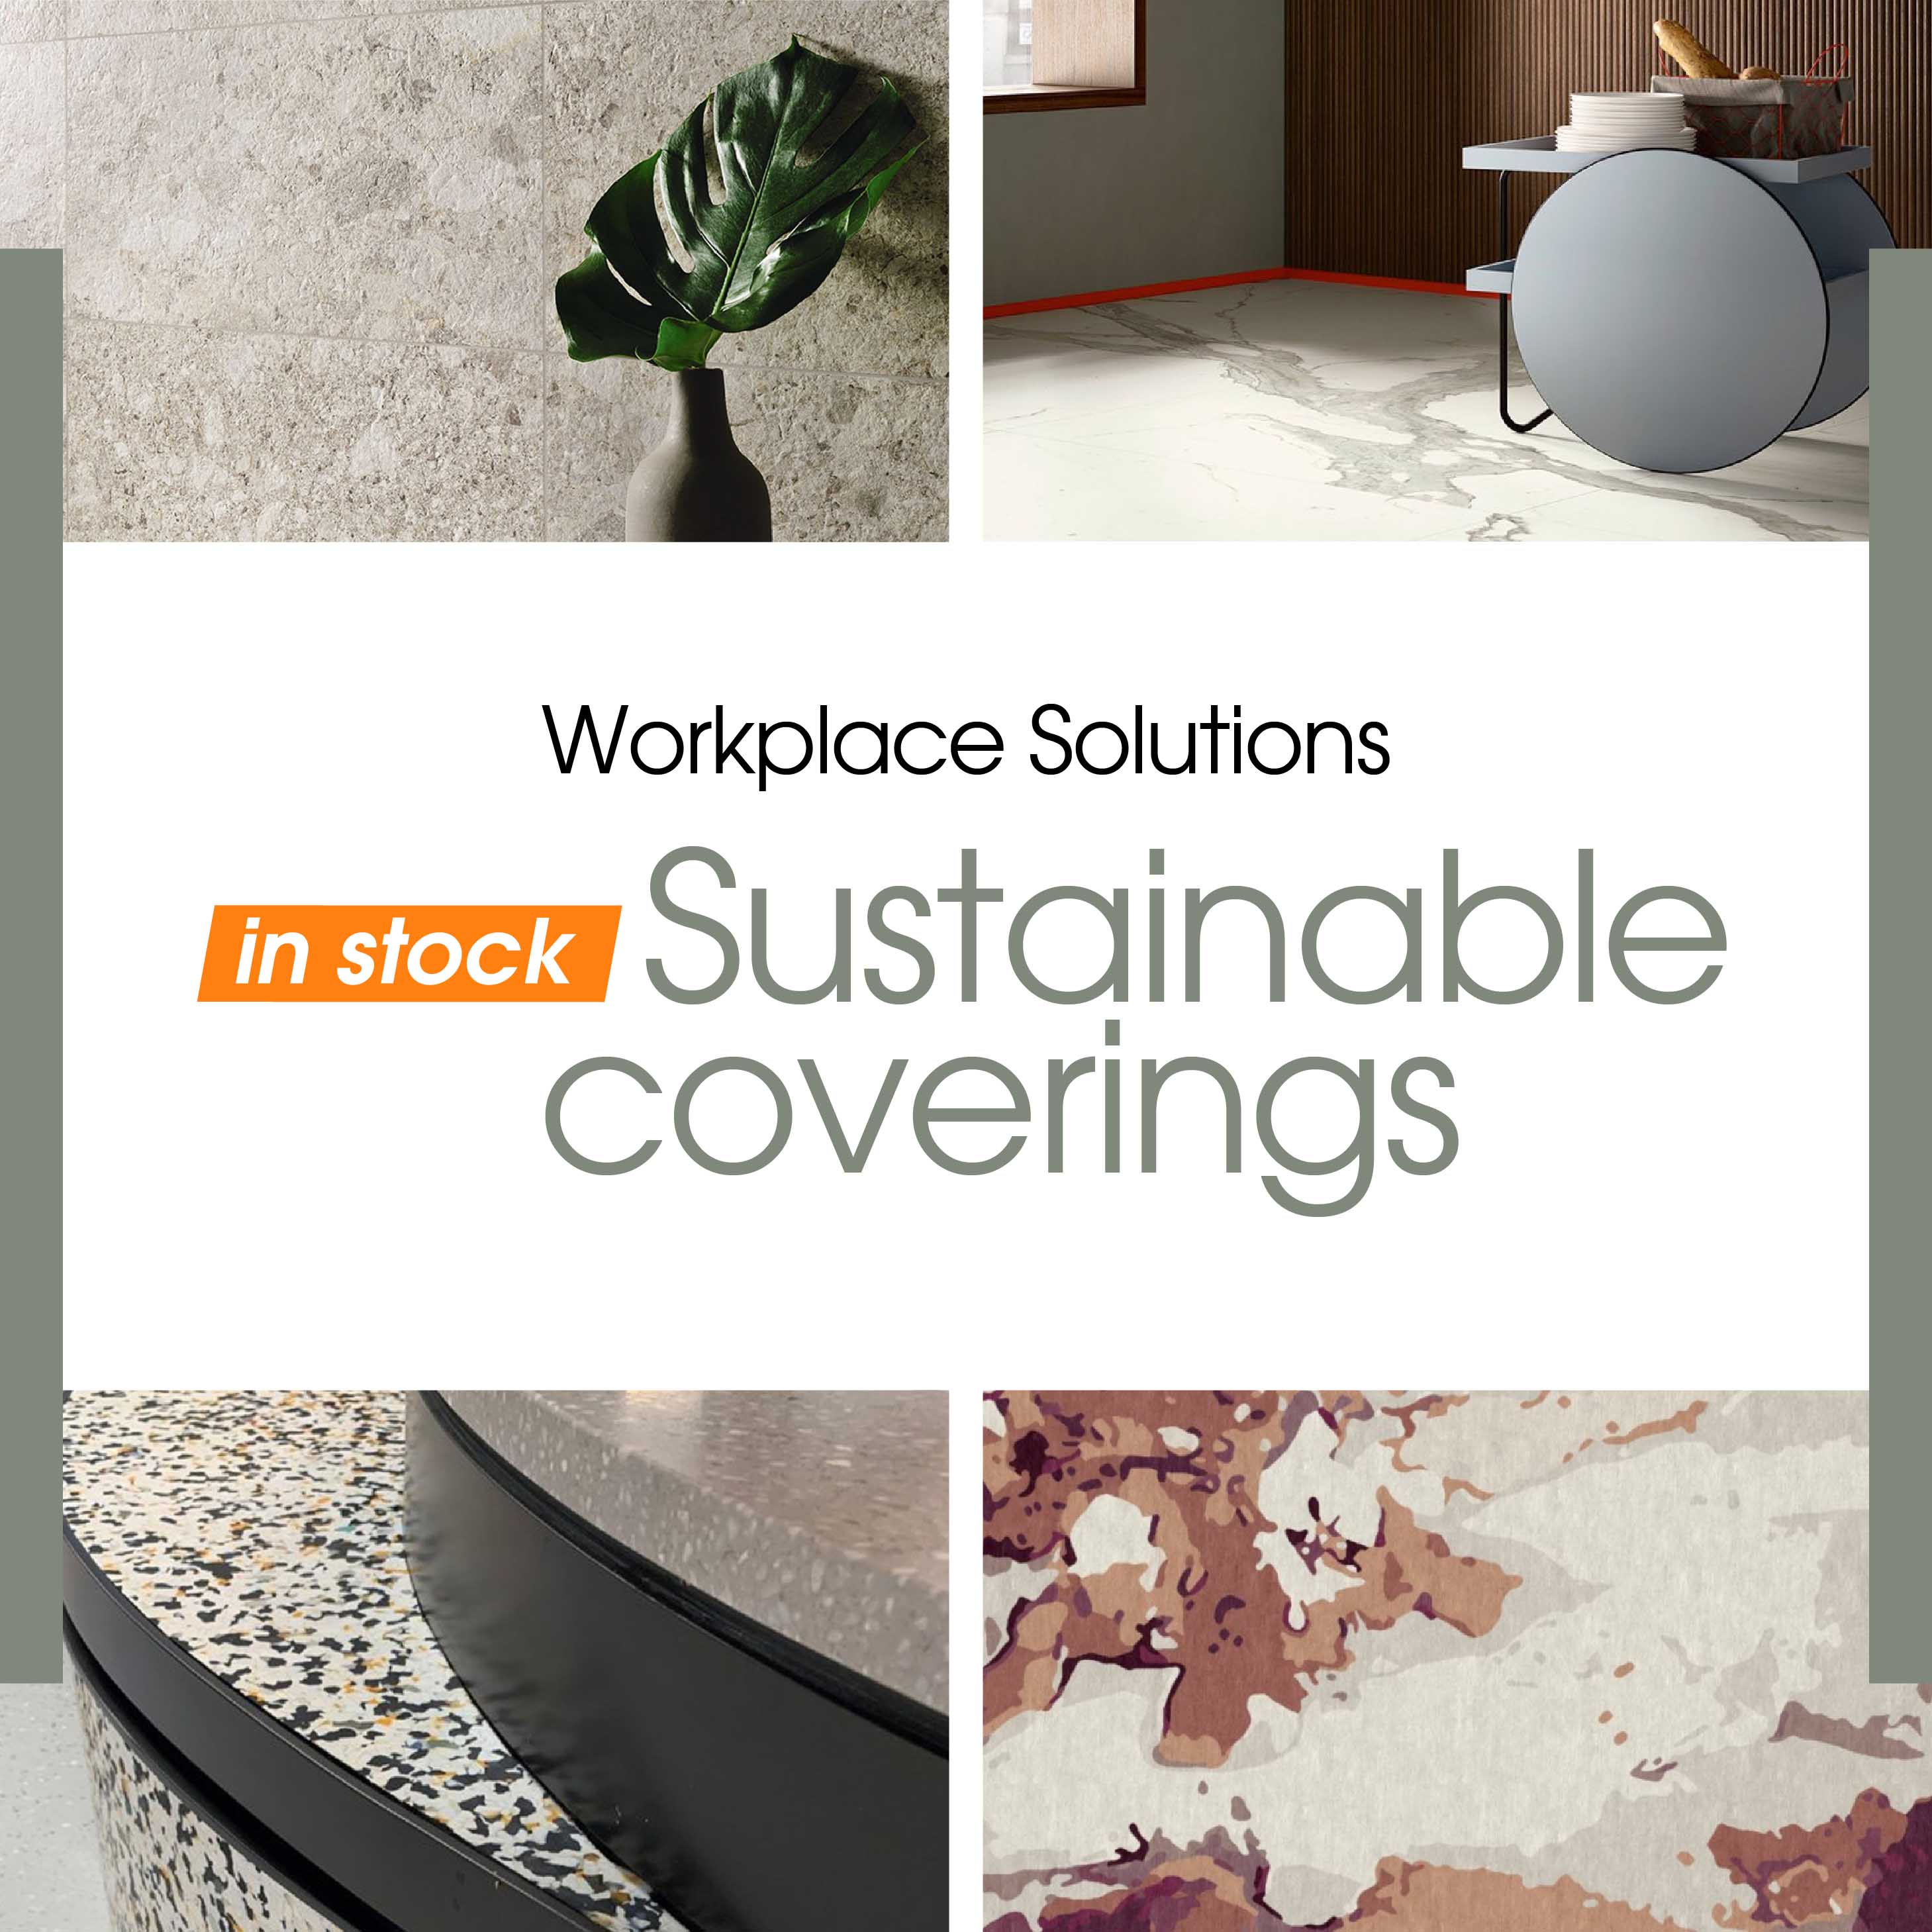 WORKPLACE SOLUTIONS | SUSTAINABLE COVERINGS